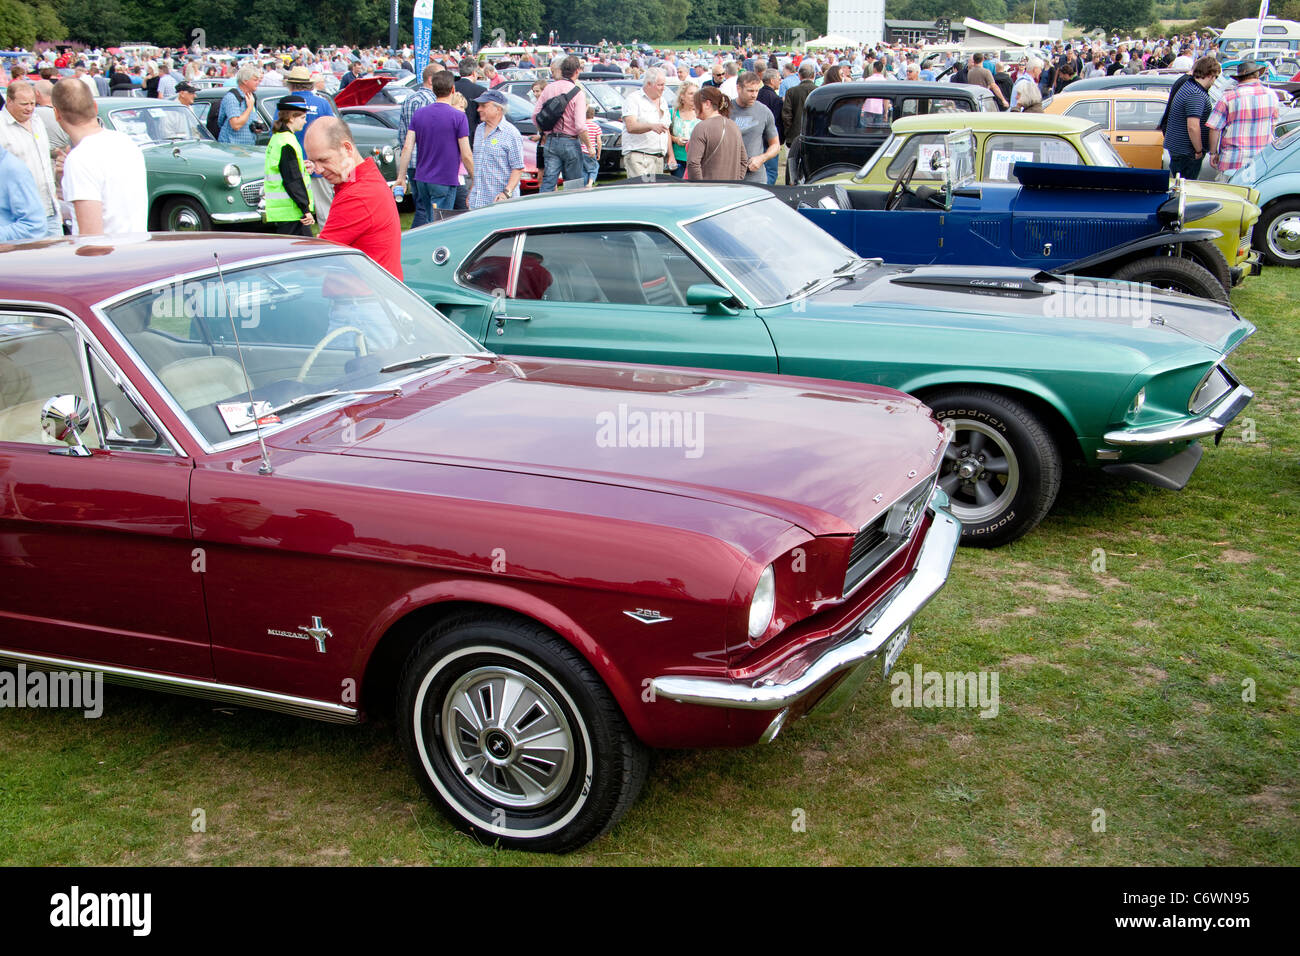 Classics on the Common Harpenden 2011 USA Ford Mustang classic car red 1966 green Mach 1 1969 Cobra jet 428 muscle motor show Stock Photo